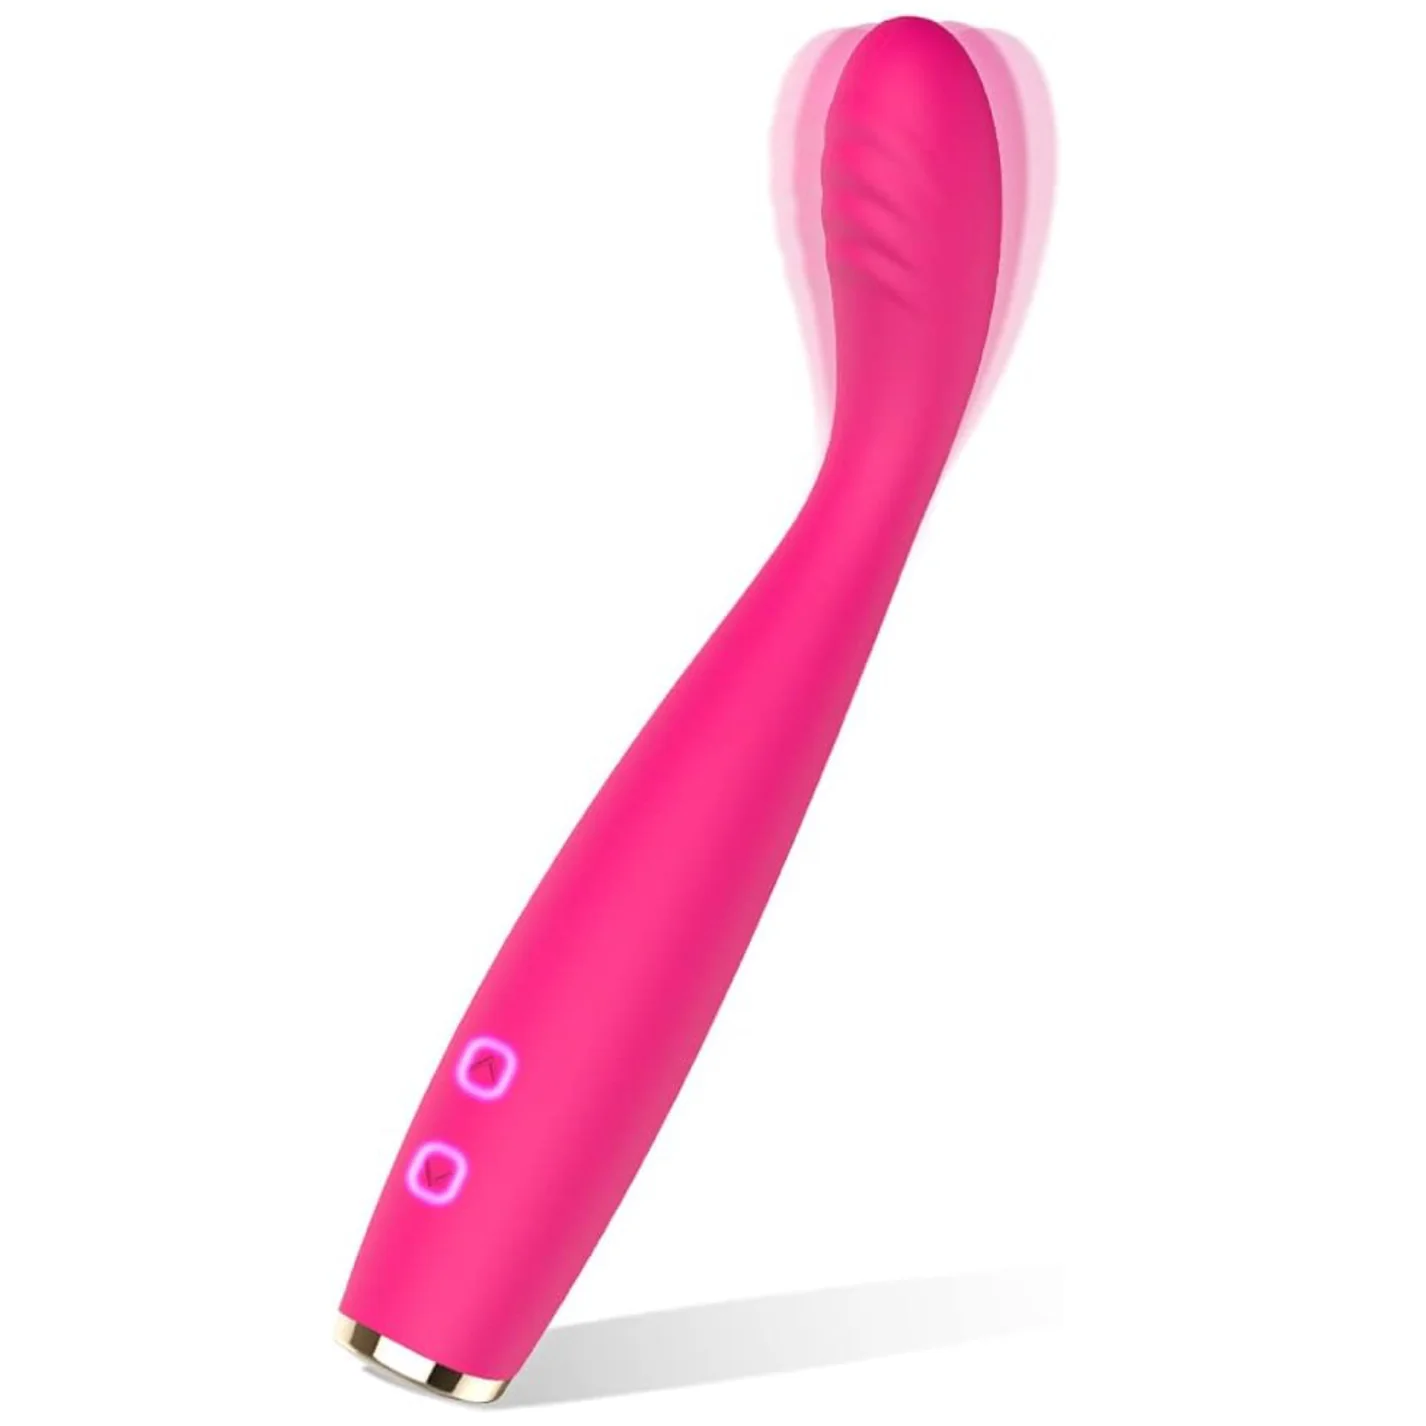 Rose Vibrator, High-Frequency G Spot Clitoris Vibrator with 5 Speeds & 10 Modes - Adorime Powerful Clitoral Stimulator, Vibrating Massager Wand for Women for Sex